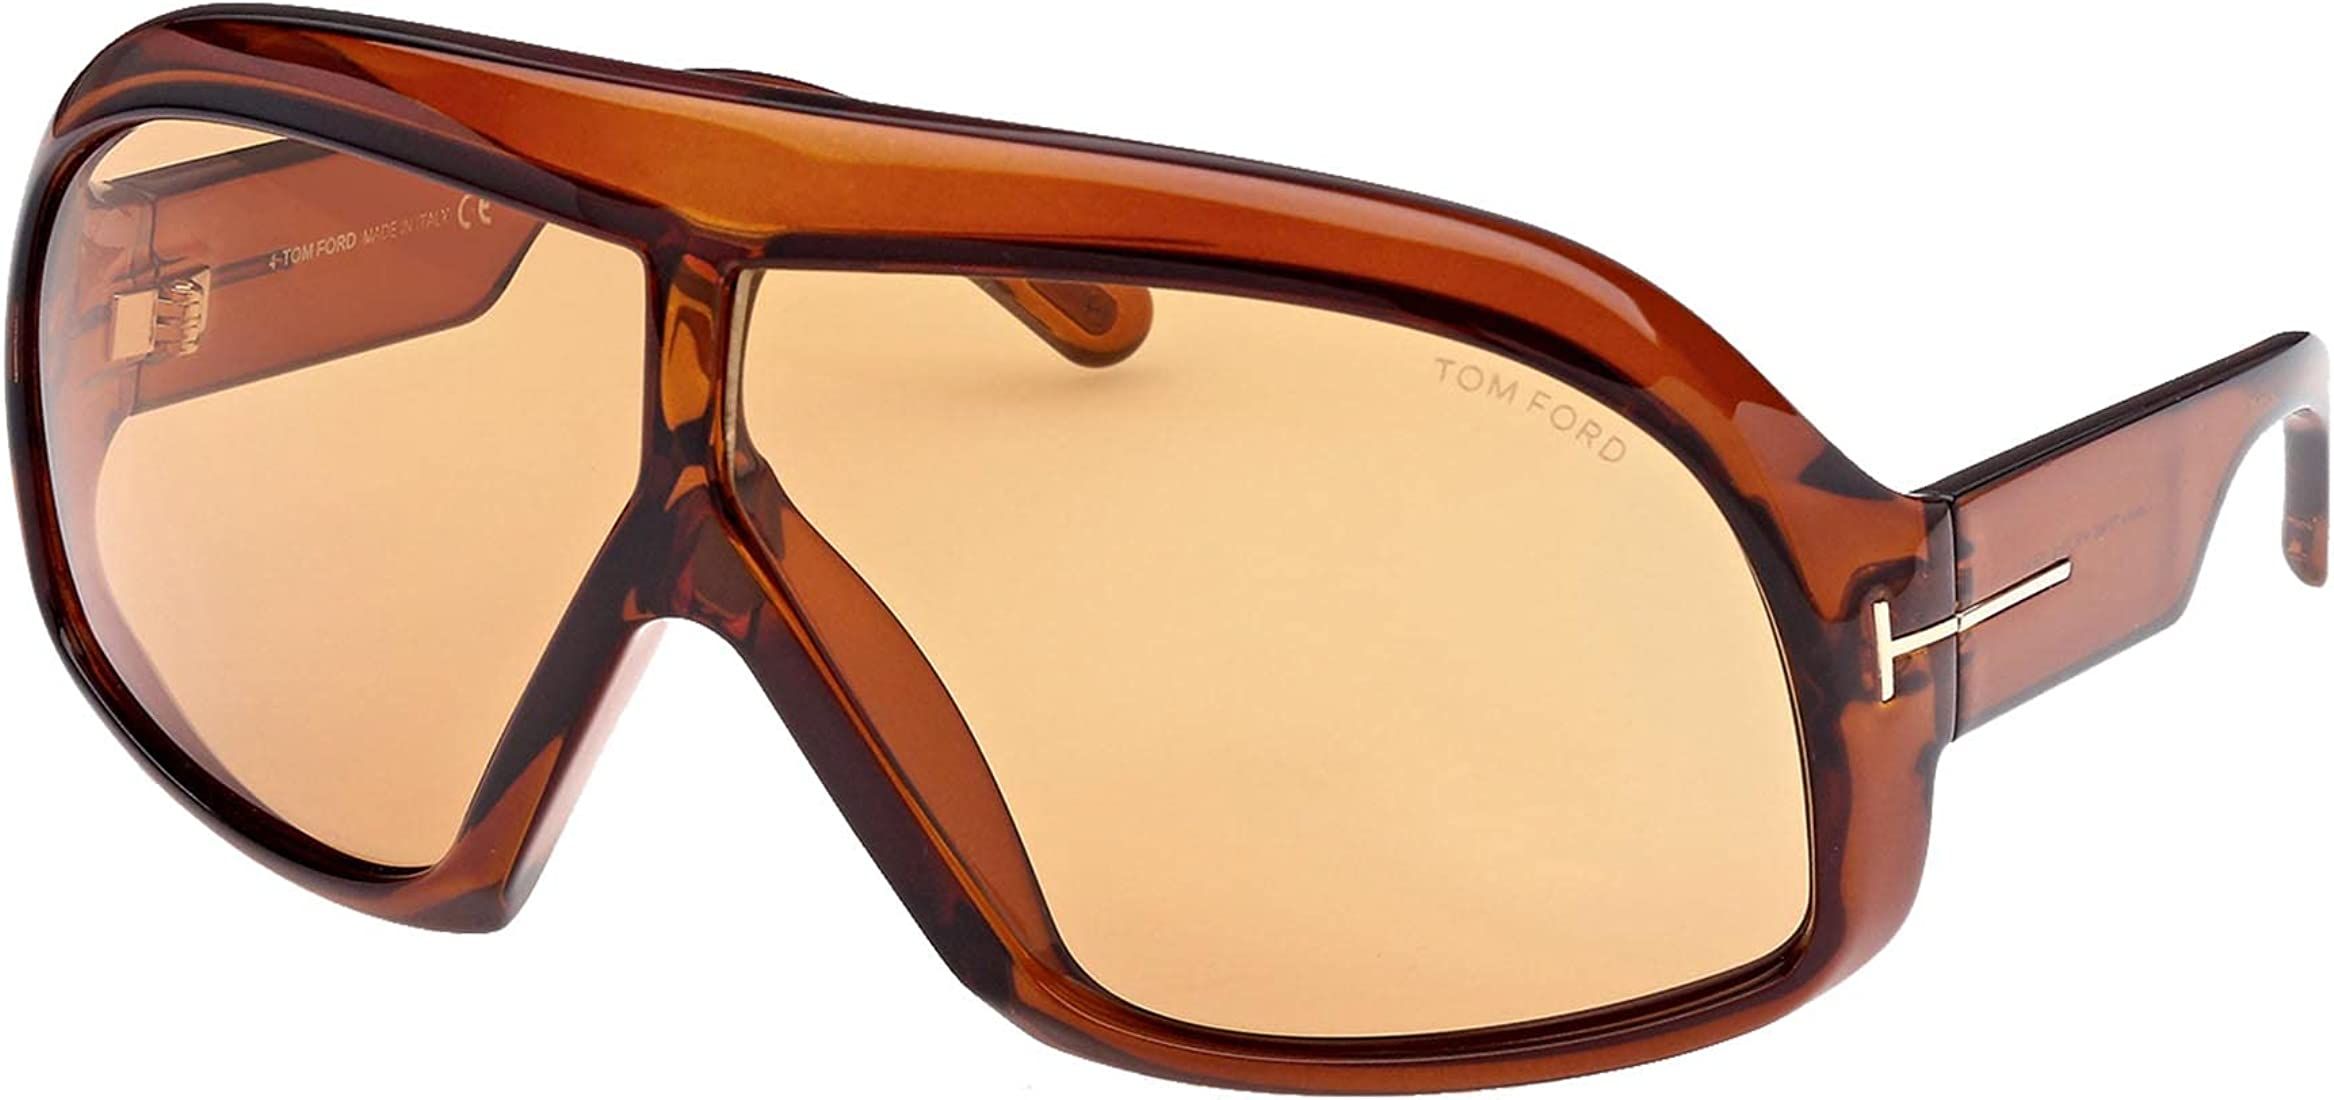 Tom Ford CASSIUS-02 FT 0965 Shiny Light Brown/Light Brown 78/4/125 unisex Sunglasses | Amazon (US)